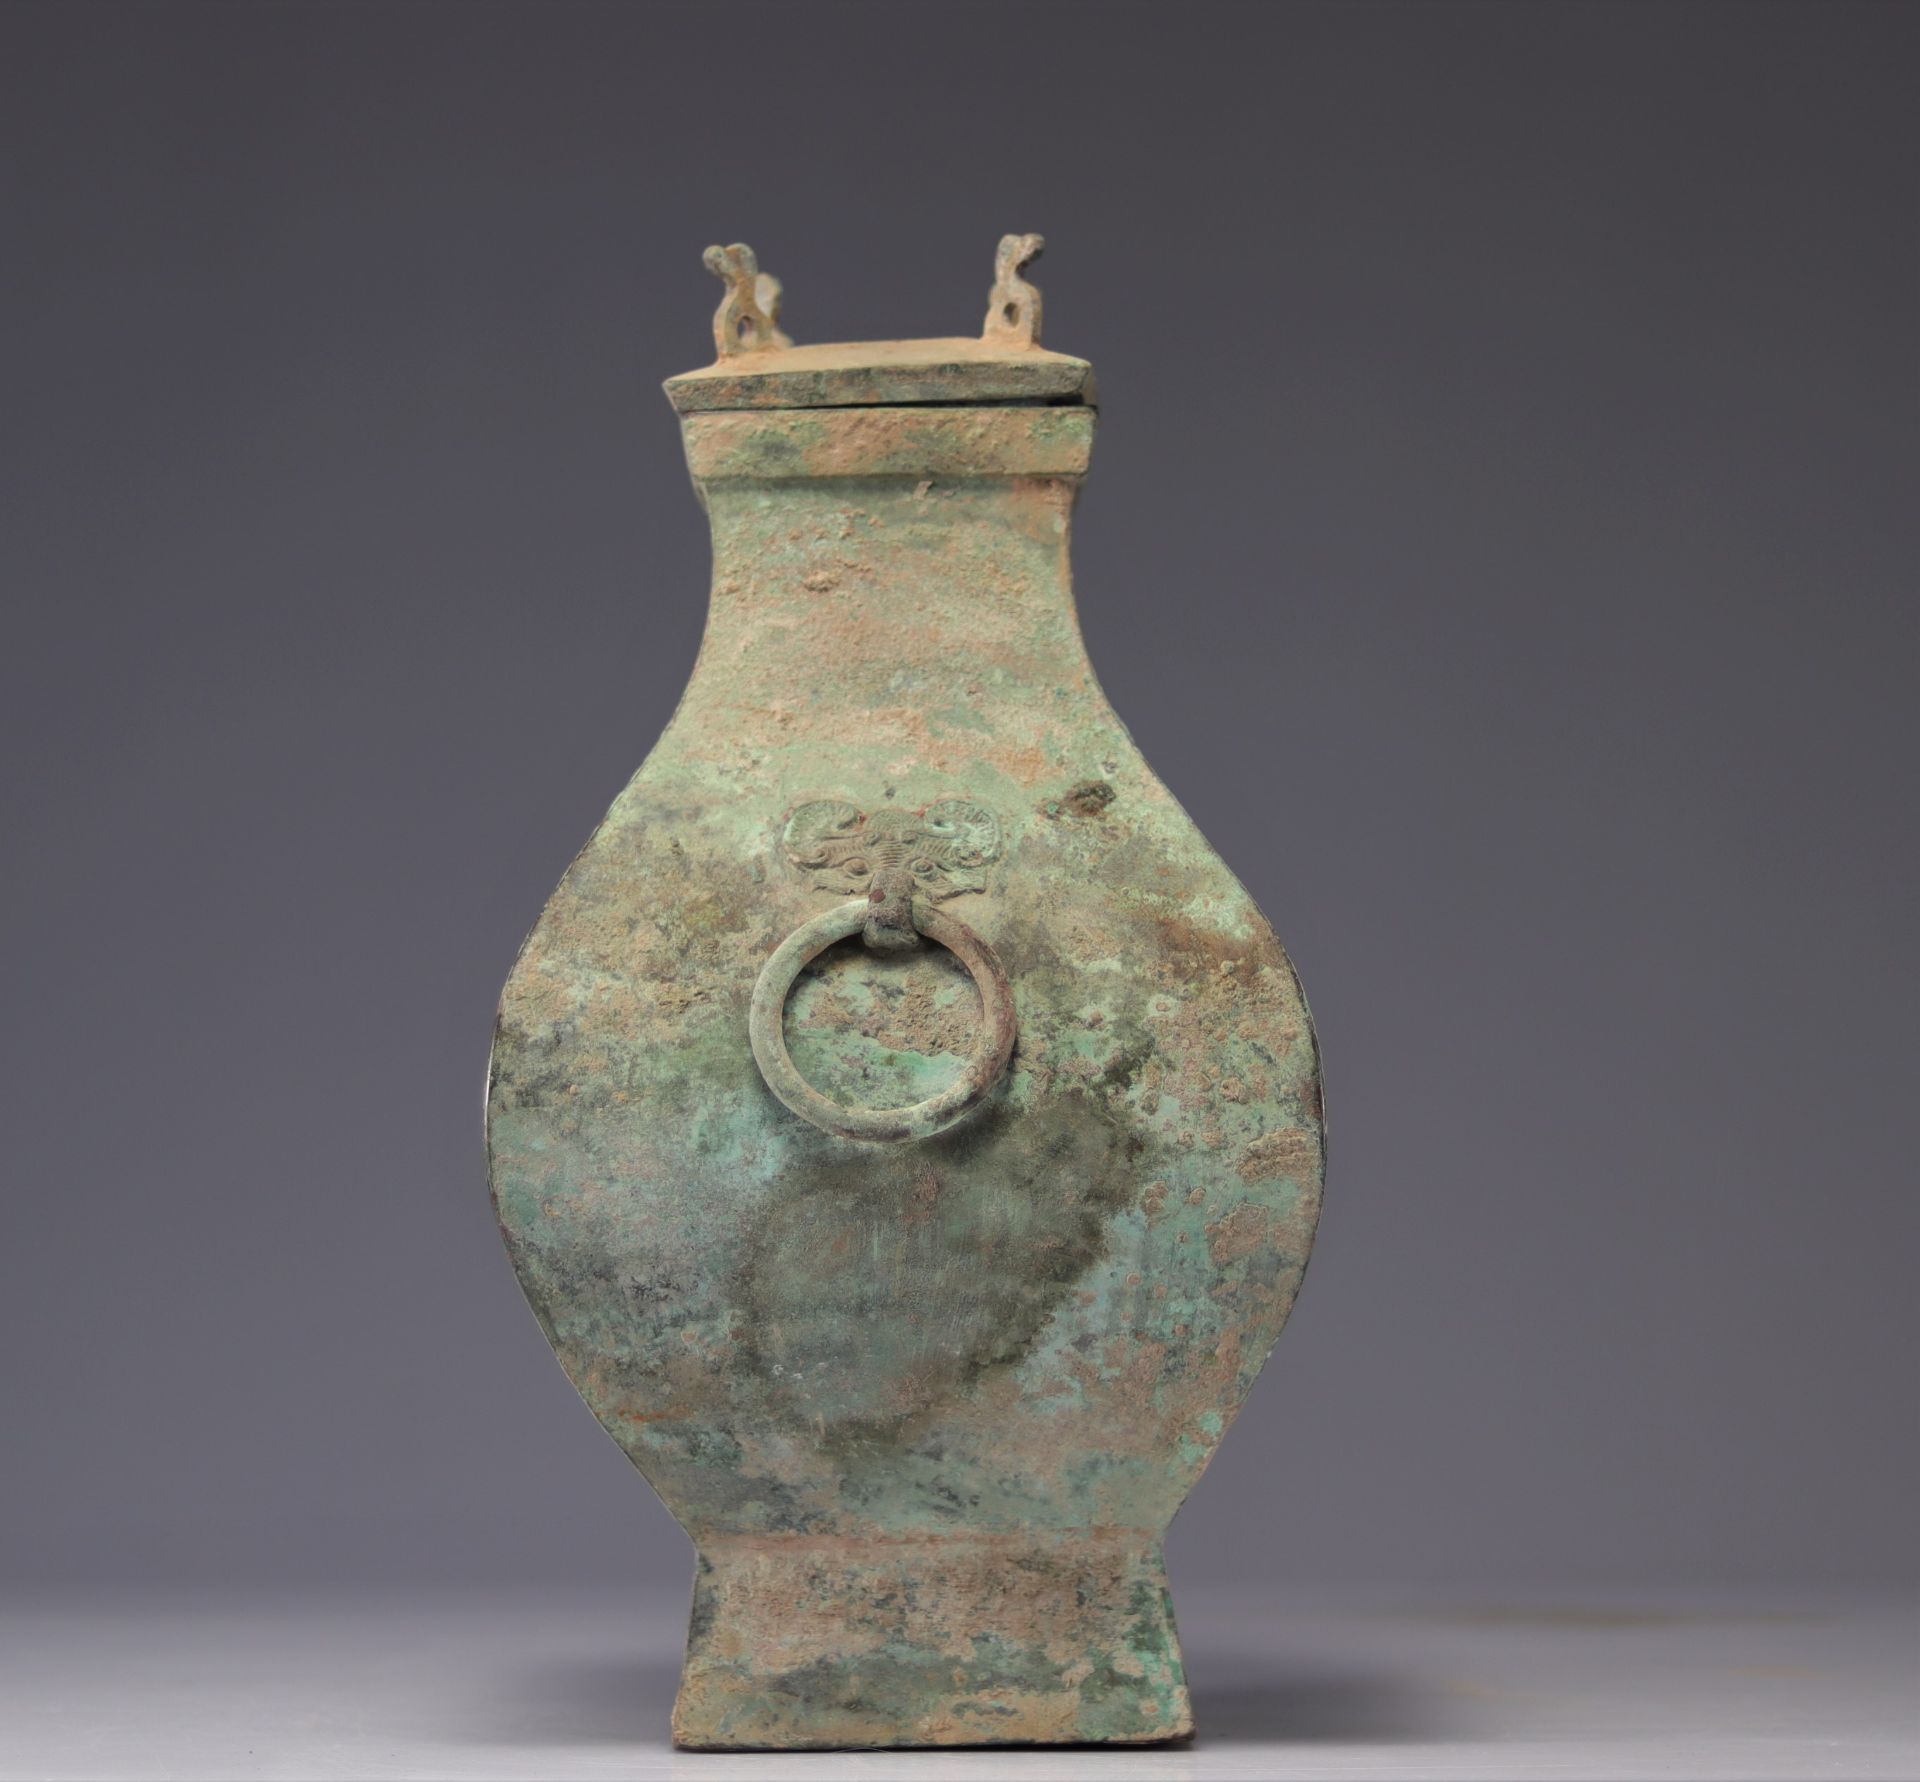 HAN DYNASTY (206 BC-220 AD) Bronze fanghu covered vase with excavation patina - Image 4 of 4